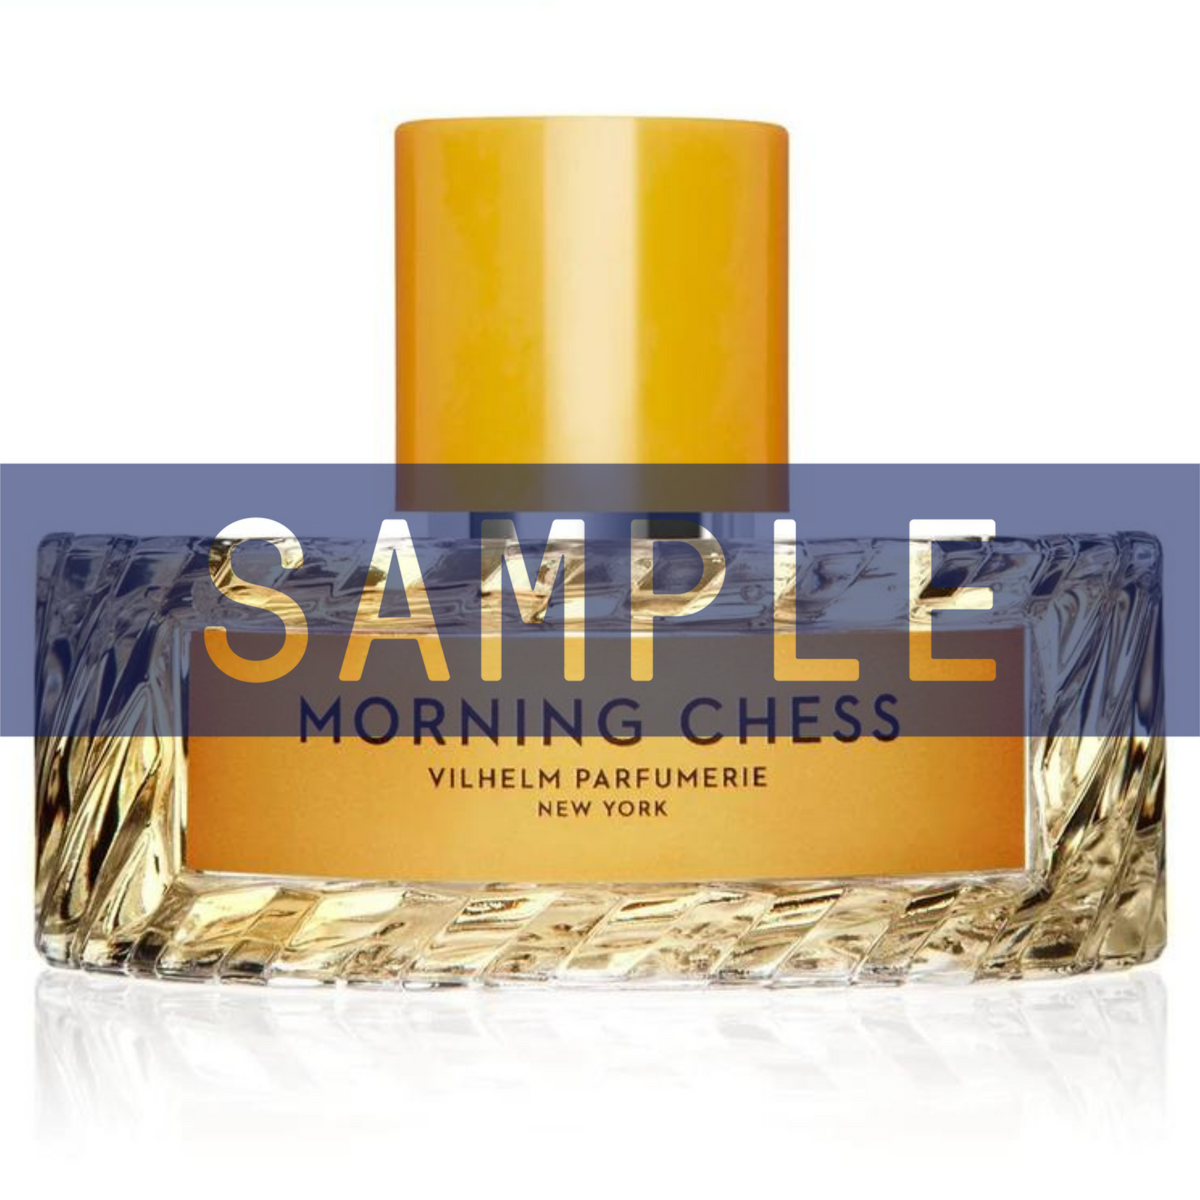 Primary Image of Sample - Morning Chess EDP